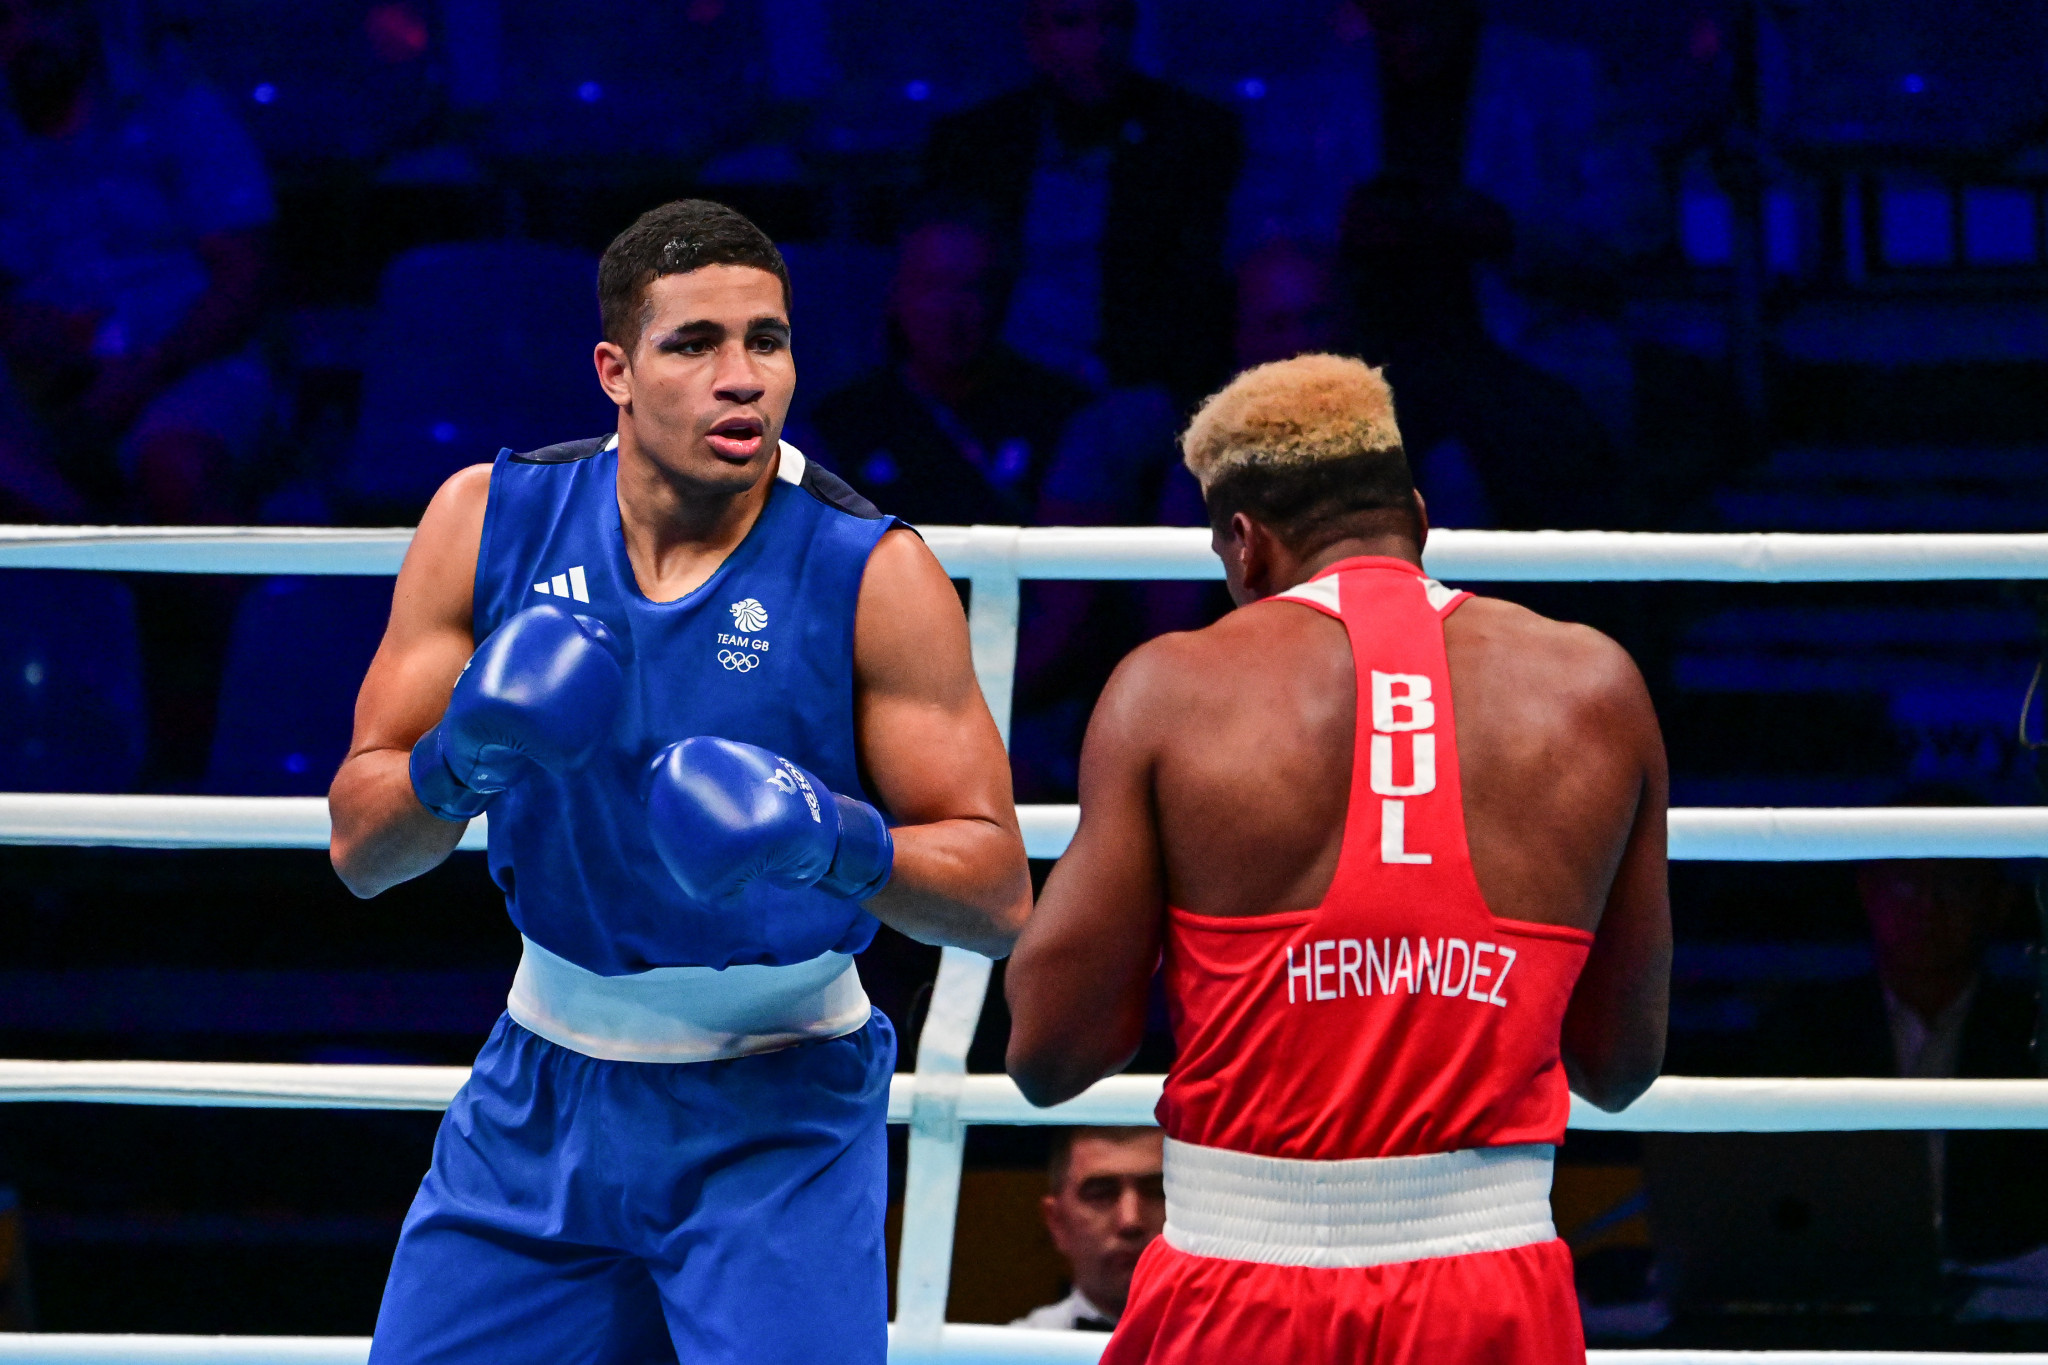 Britain's Delicious Orie, left, said it was "a day I will never forget" after securing the final Paris 2024 quota place in boxing at the European Games in the men's over-92kg division ©Kraków-Małopolska 2023